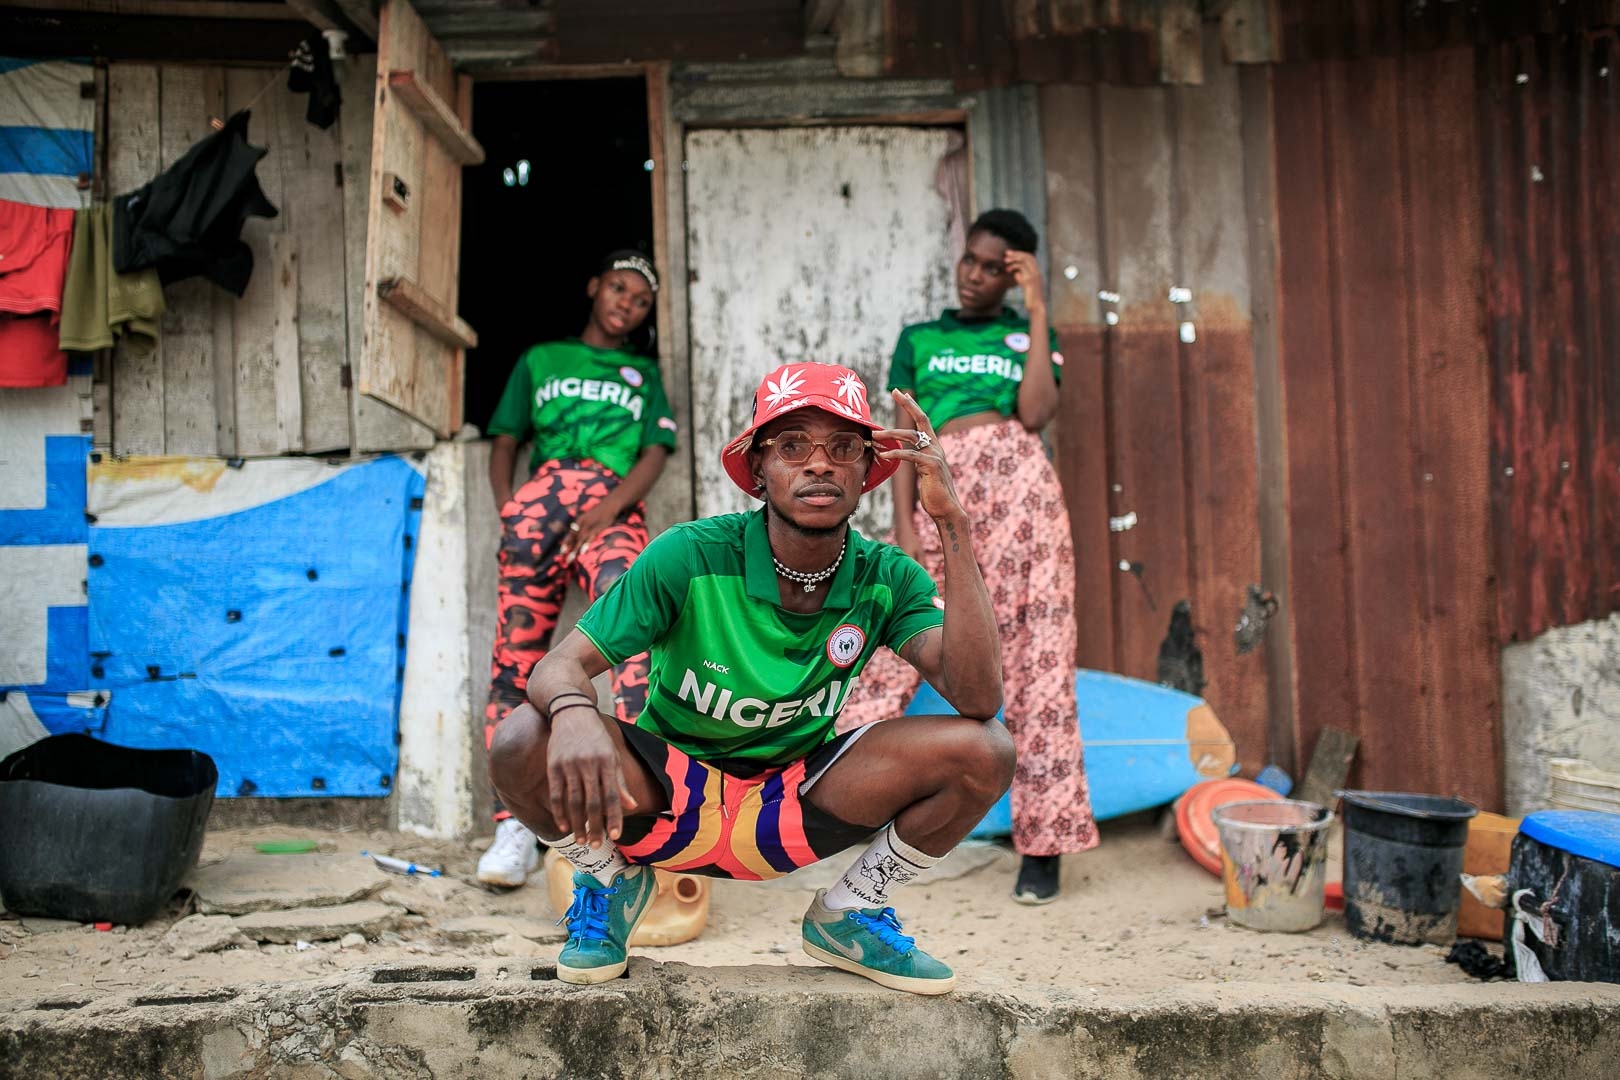 NACK Apparel Promotes Patriotism And Unity Amongst Nigerians In Latest Campaign